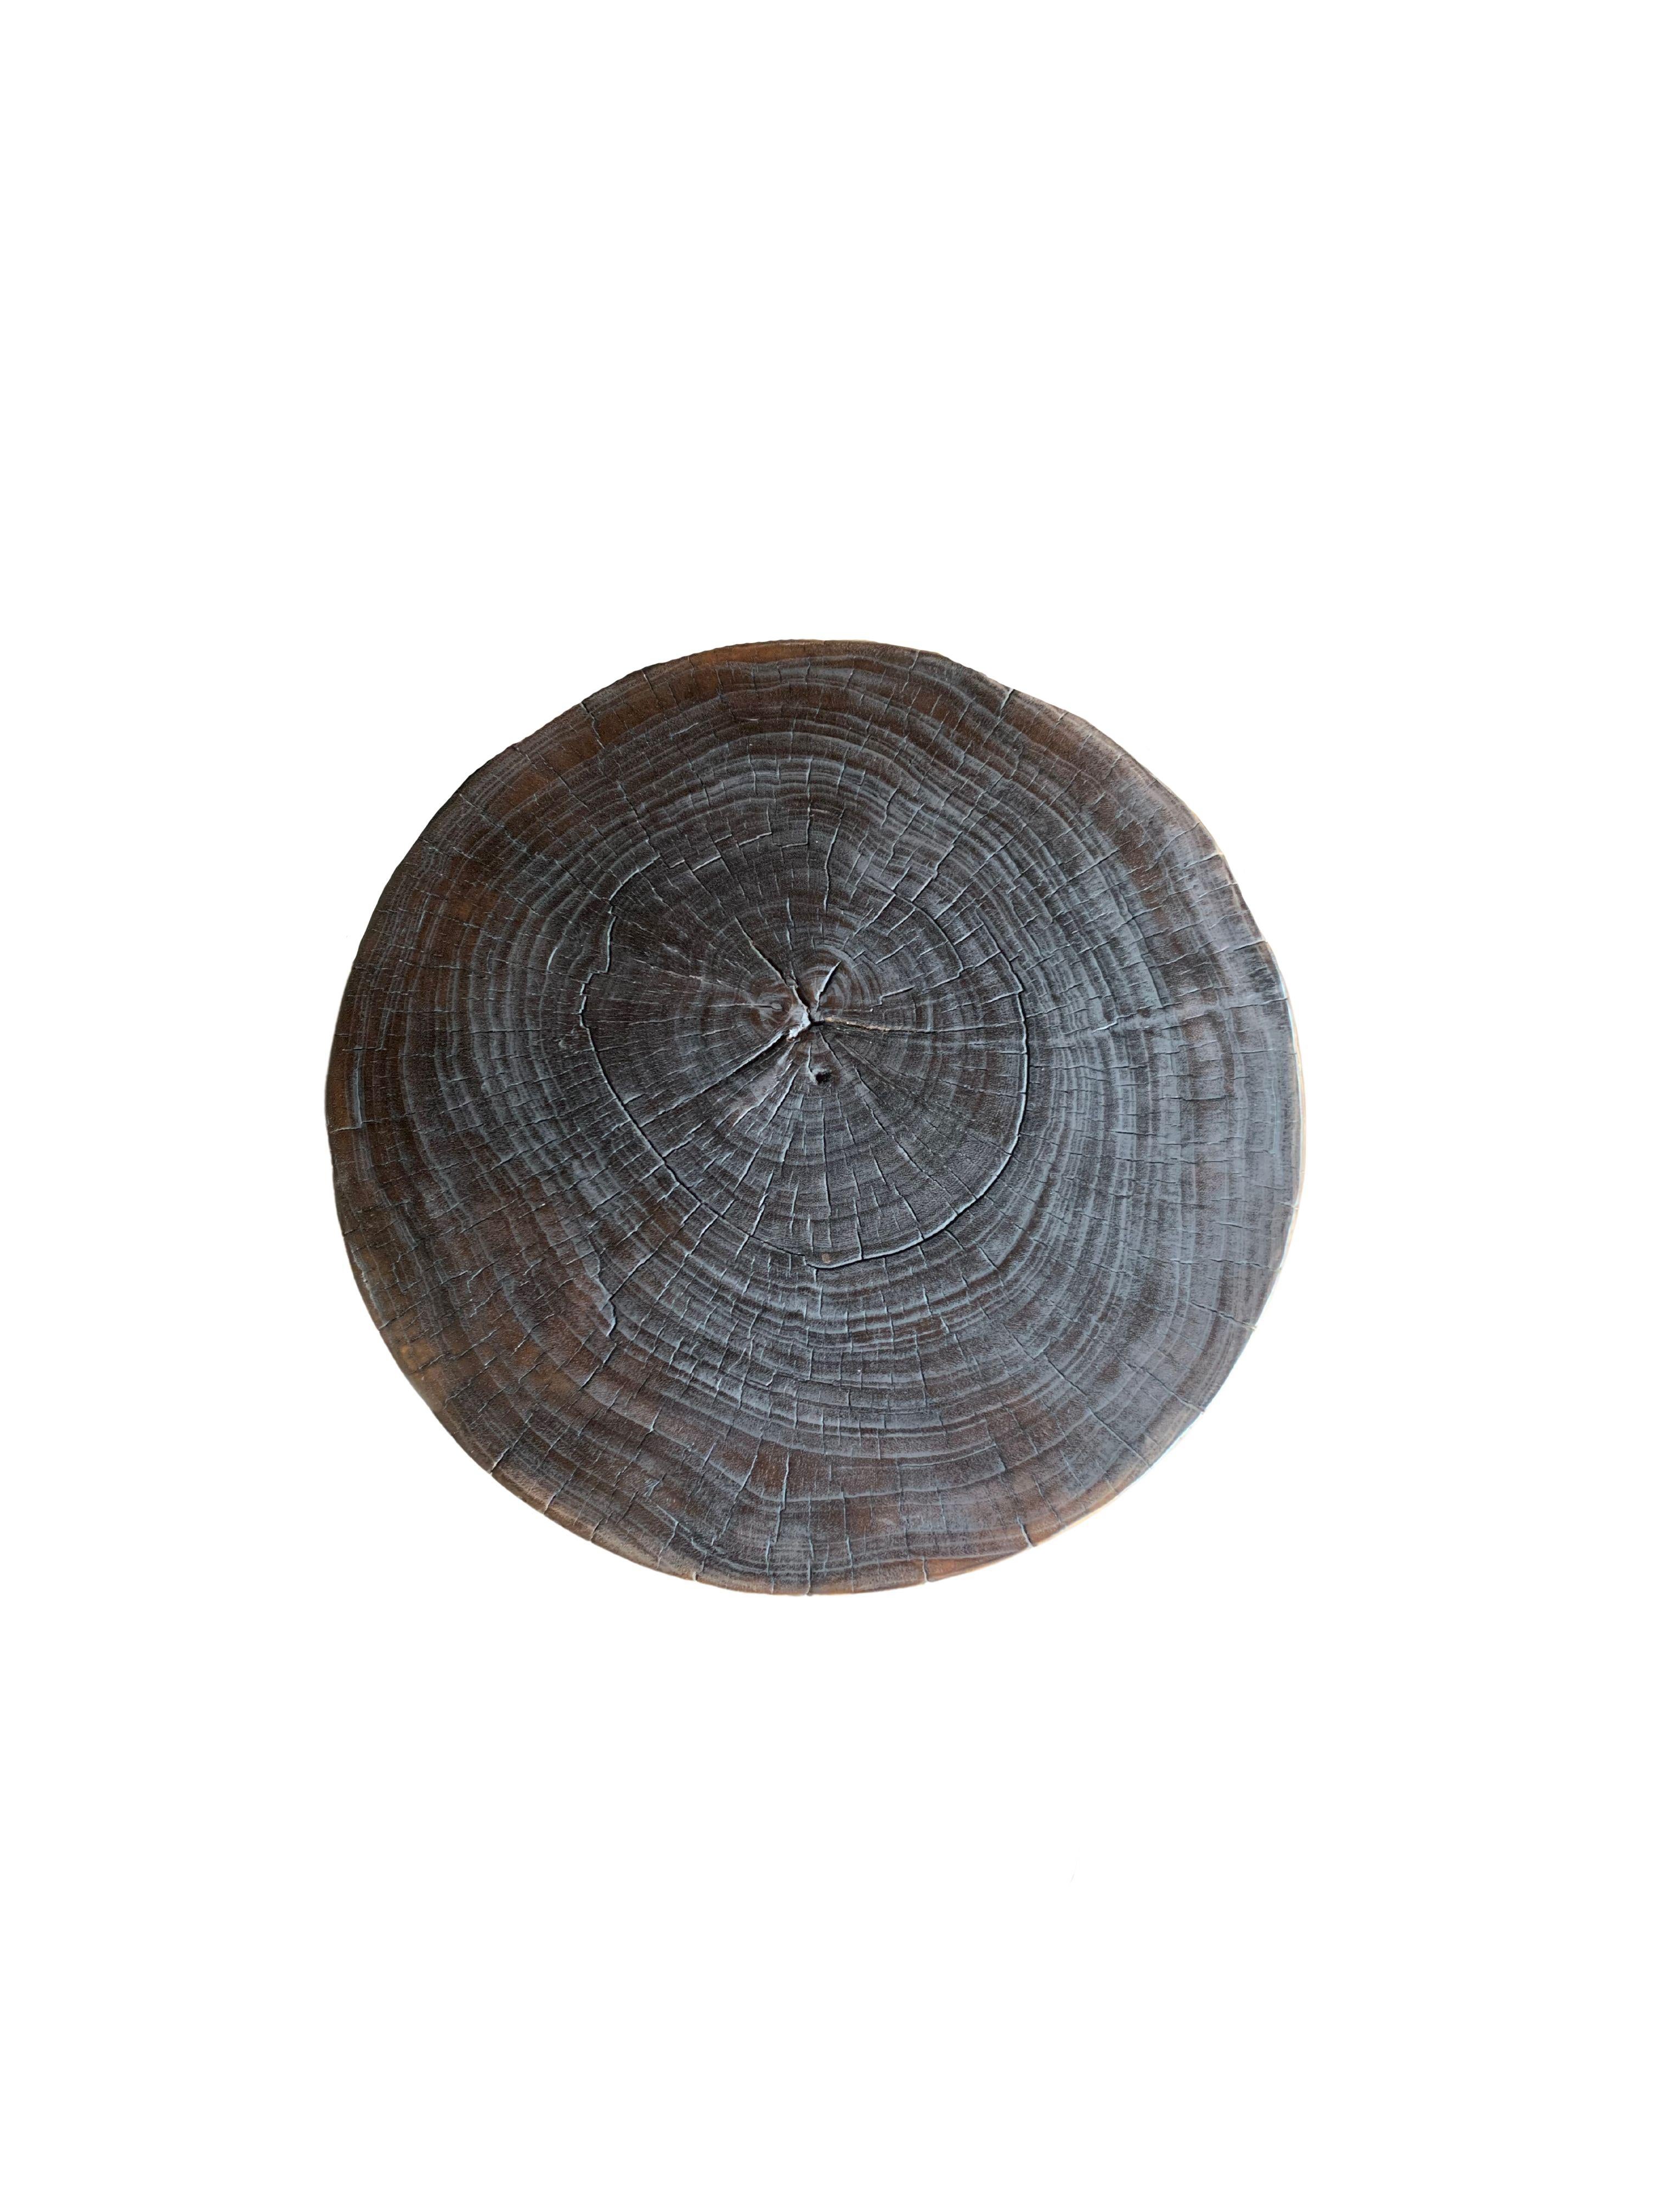 Organic Modern Sculptural Round Side Table Mango Wood For Sale